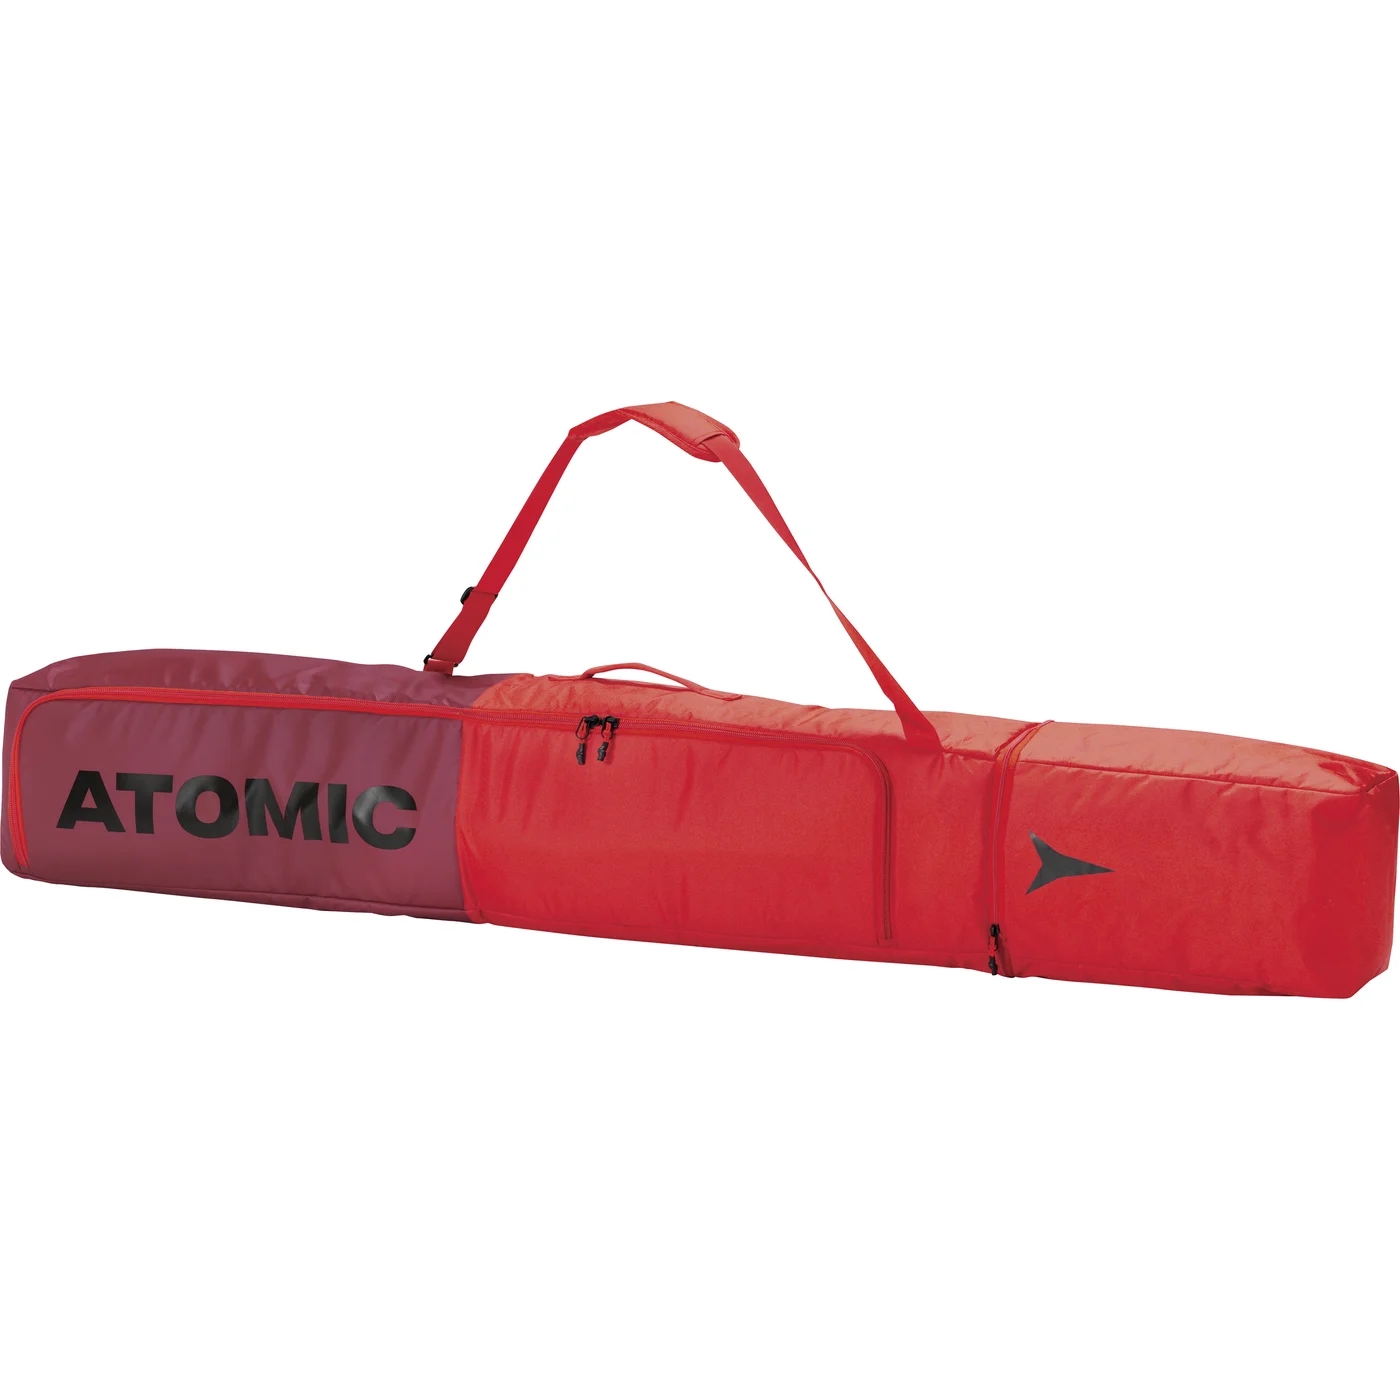 ATOMIC HÜLLE DOUBLE SKI BAG RED/RIO RED Red/Rio Red/ 4pOIDdh1